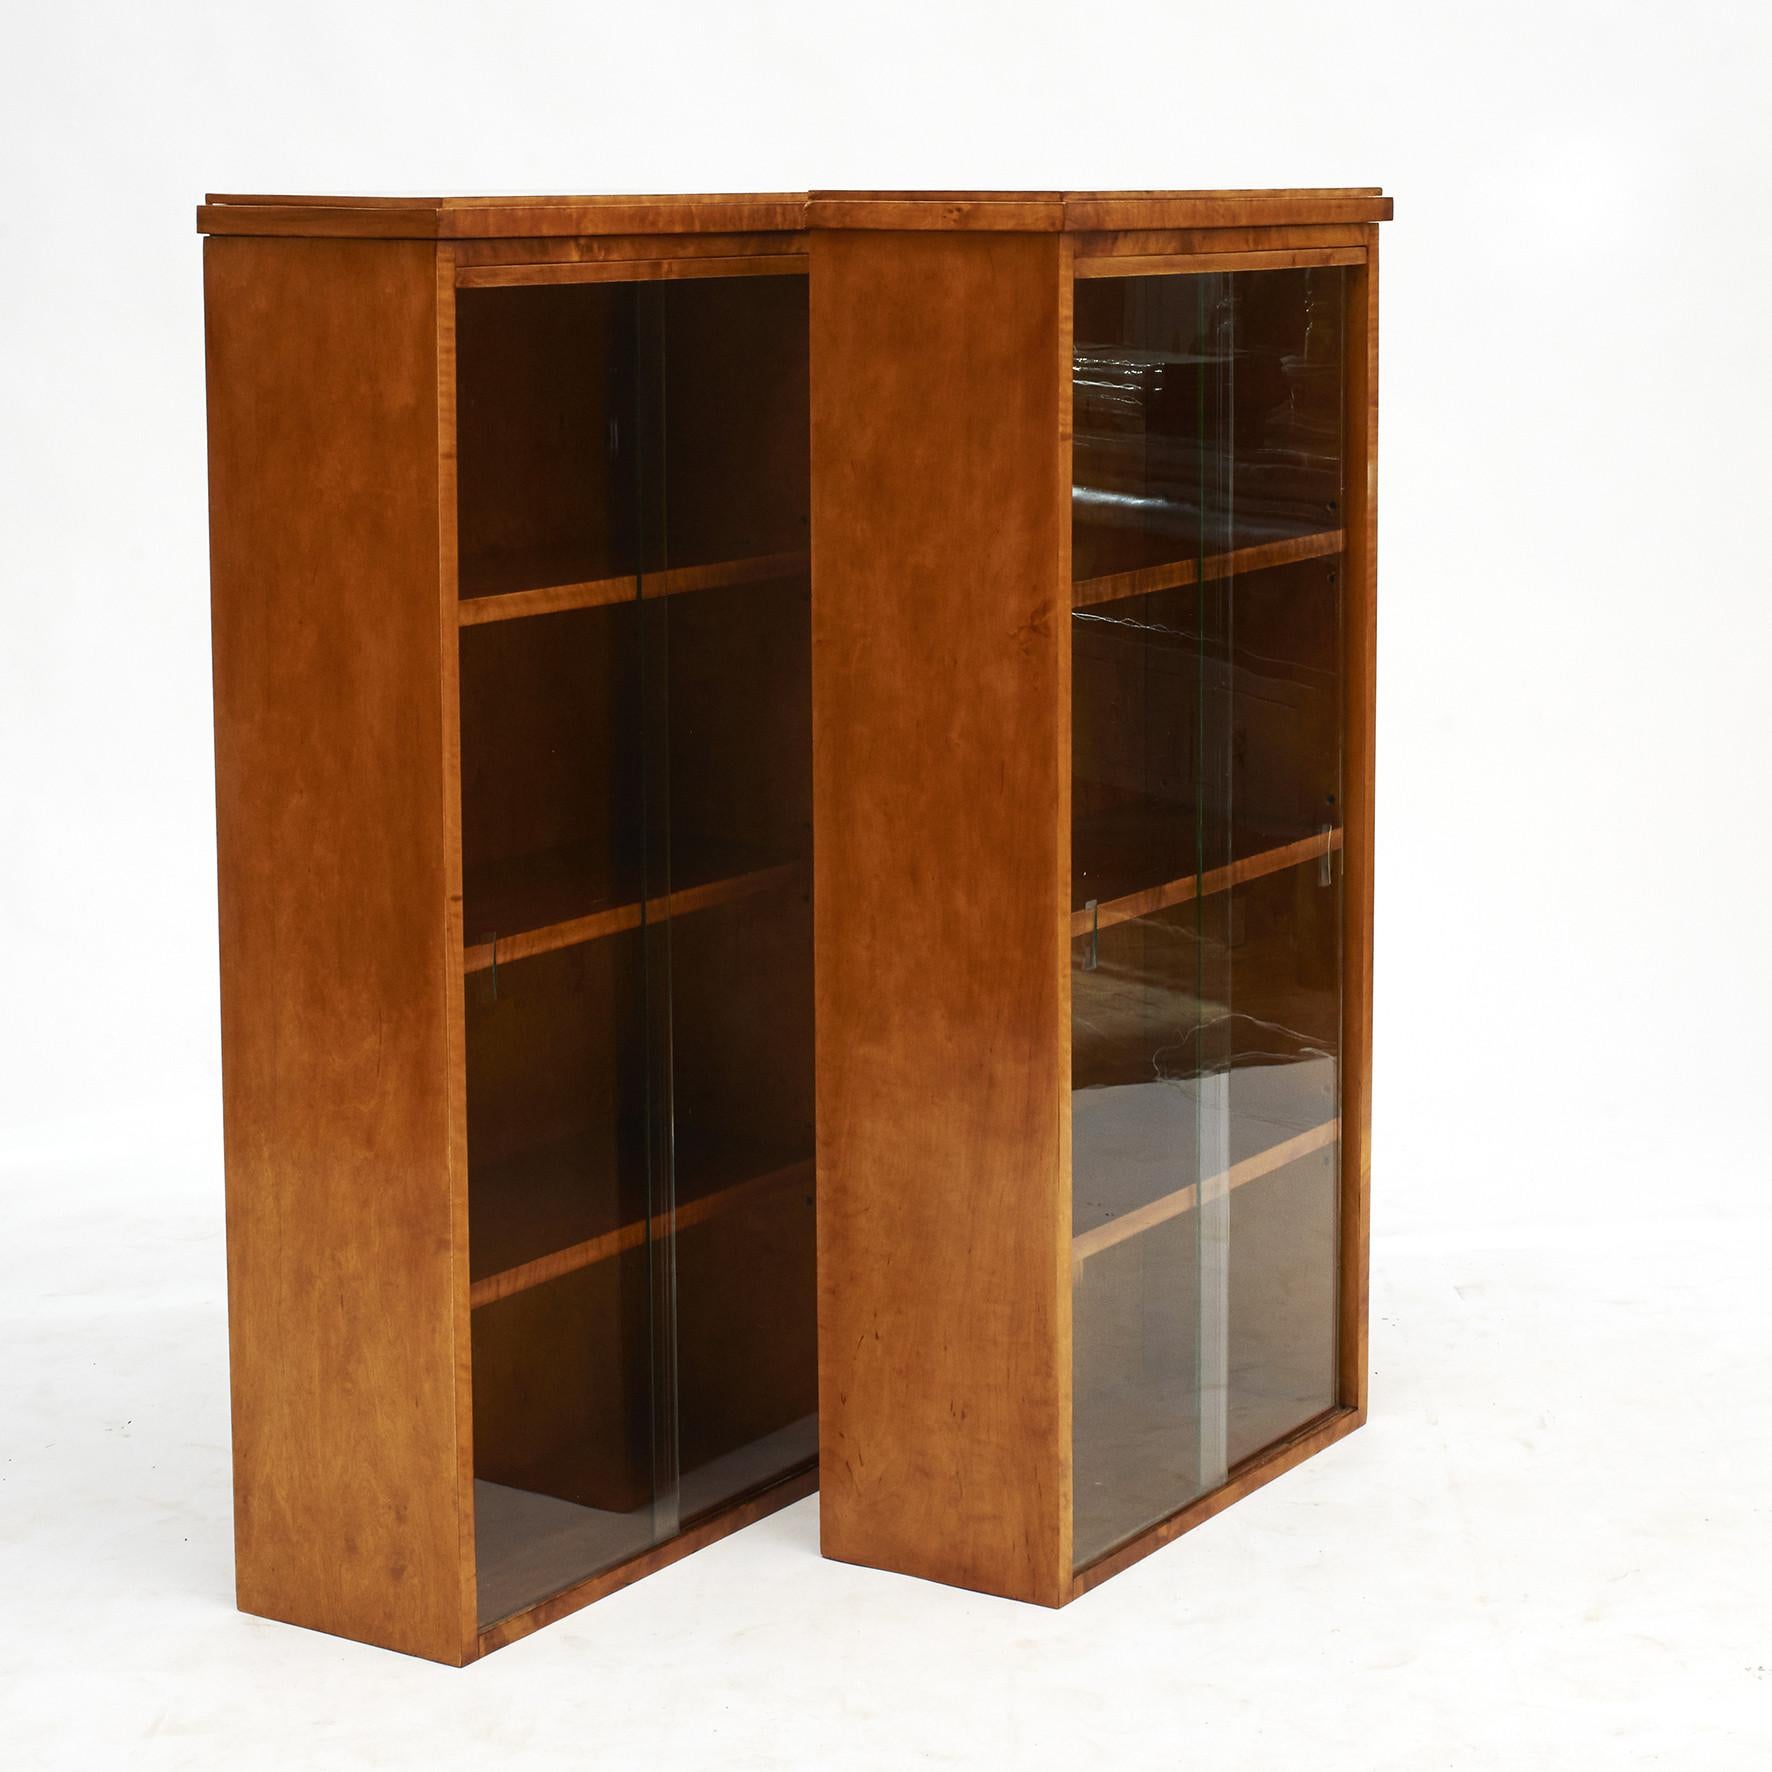 Pair of Art Deco hanging cabinets, veneered with flamed birch.
Sliding glass doors with three shelves inside.
Denmark, circa 1920.
Sold individually for 2.020,- €.